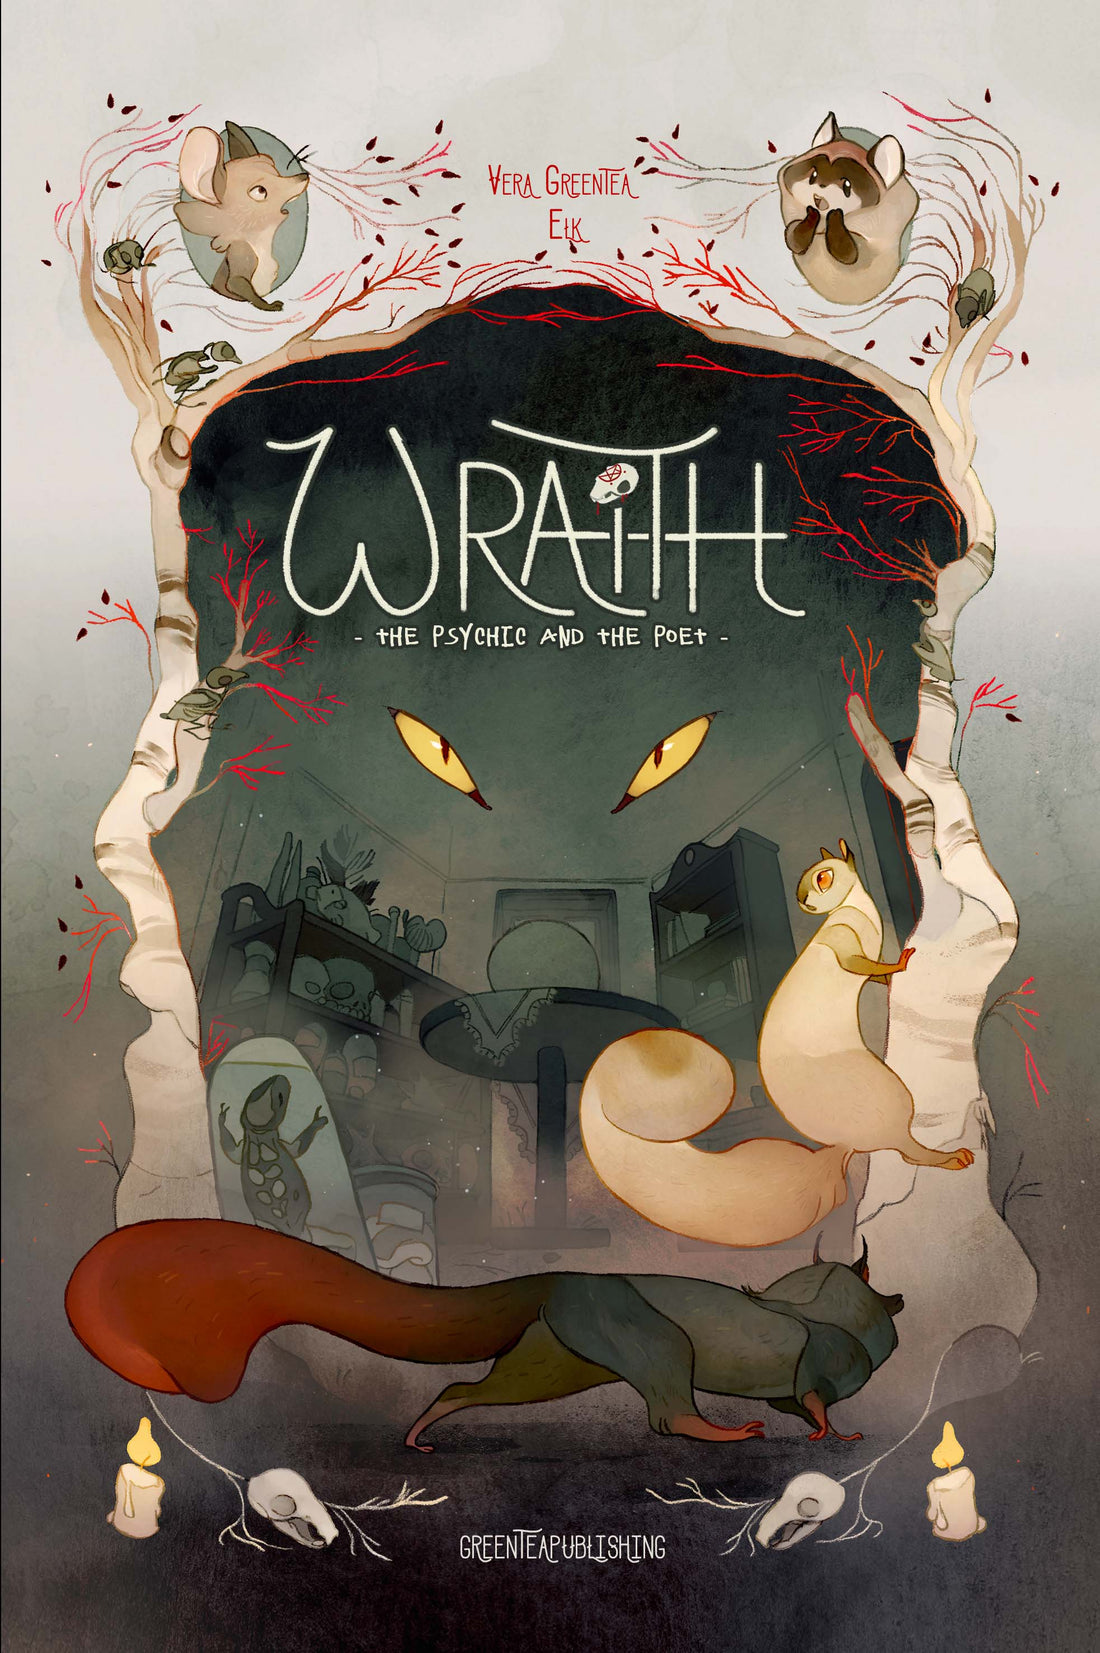 You can now purchase Wraith: The Psychic and the Poet!